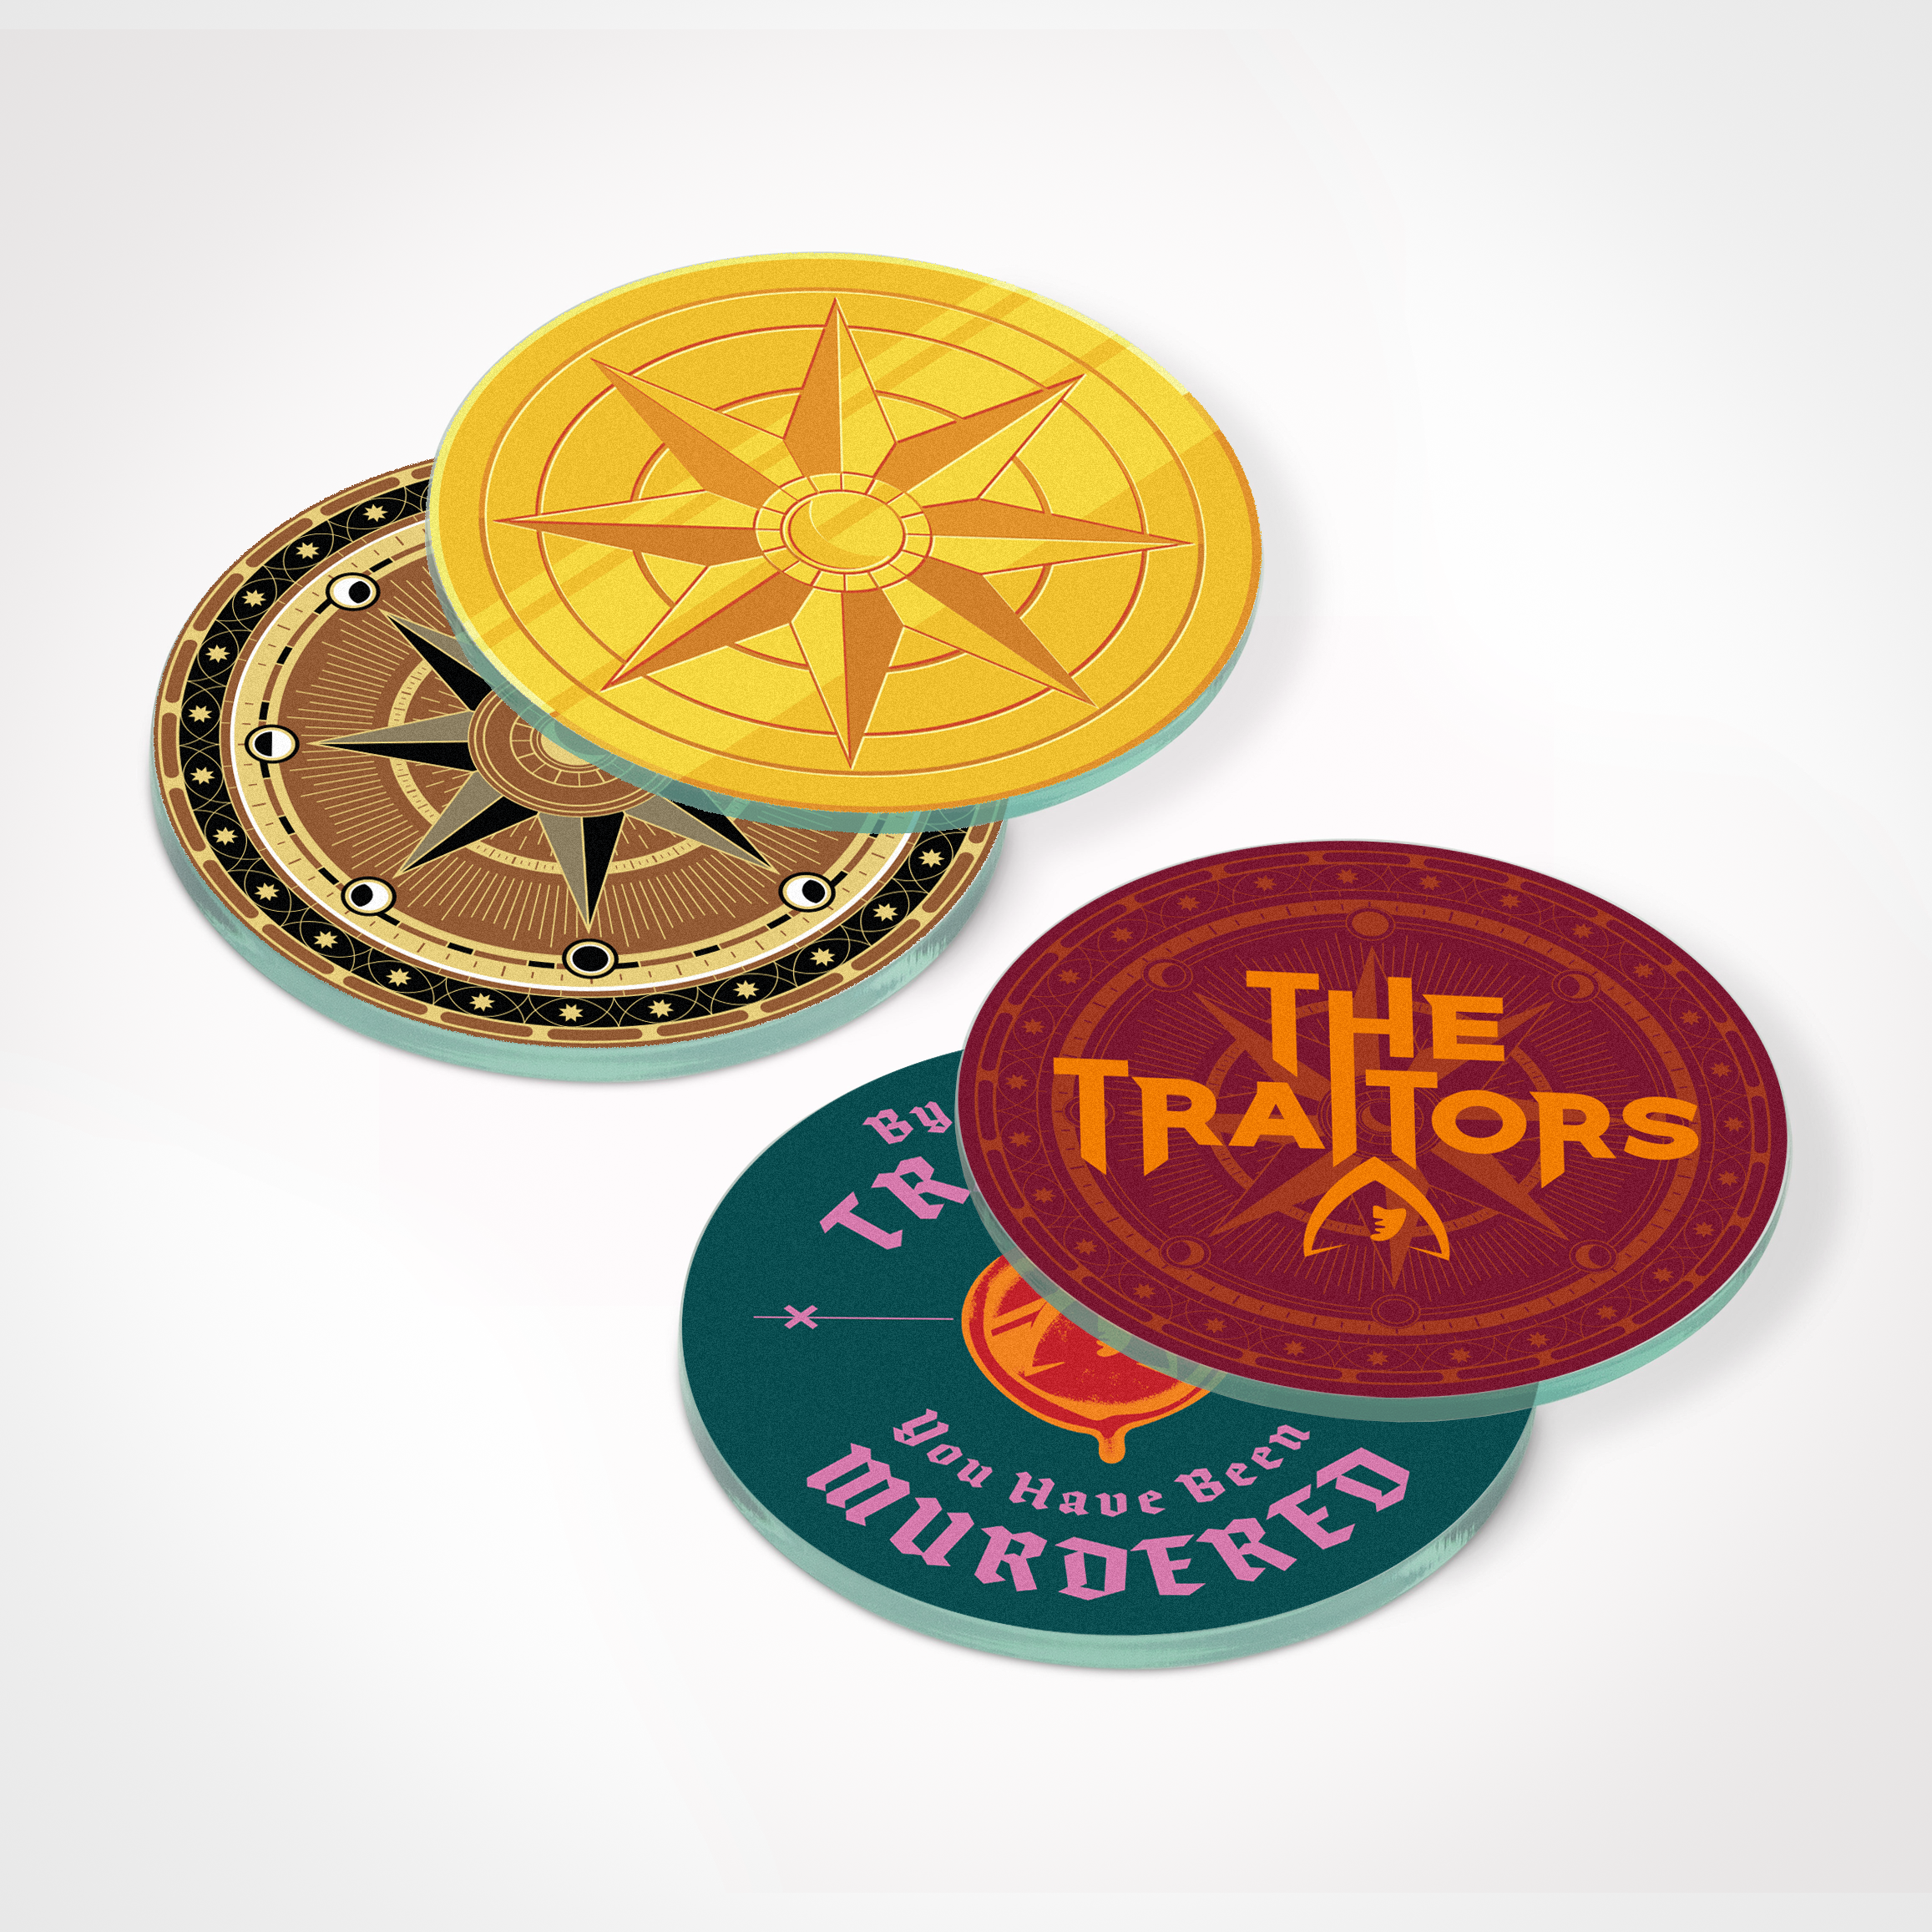 The Traitors Recycled Glass Coaster Set